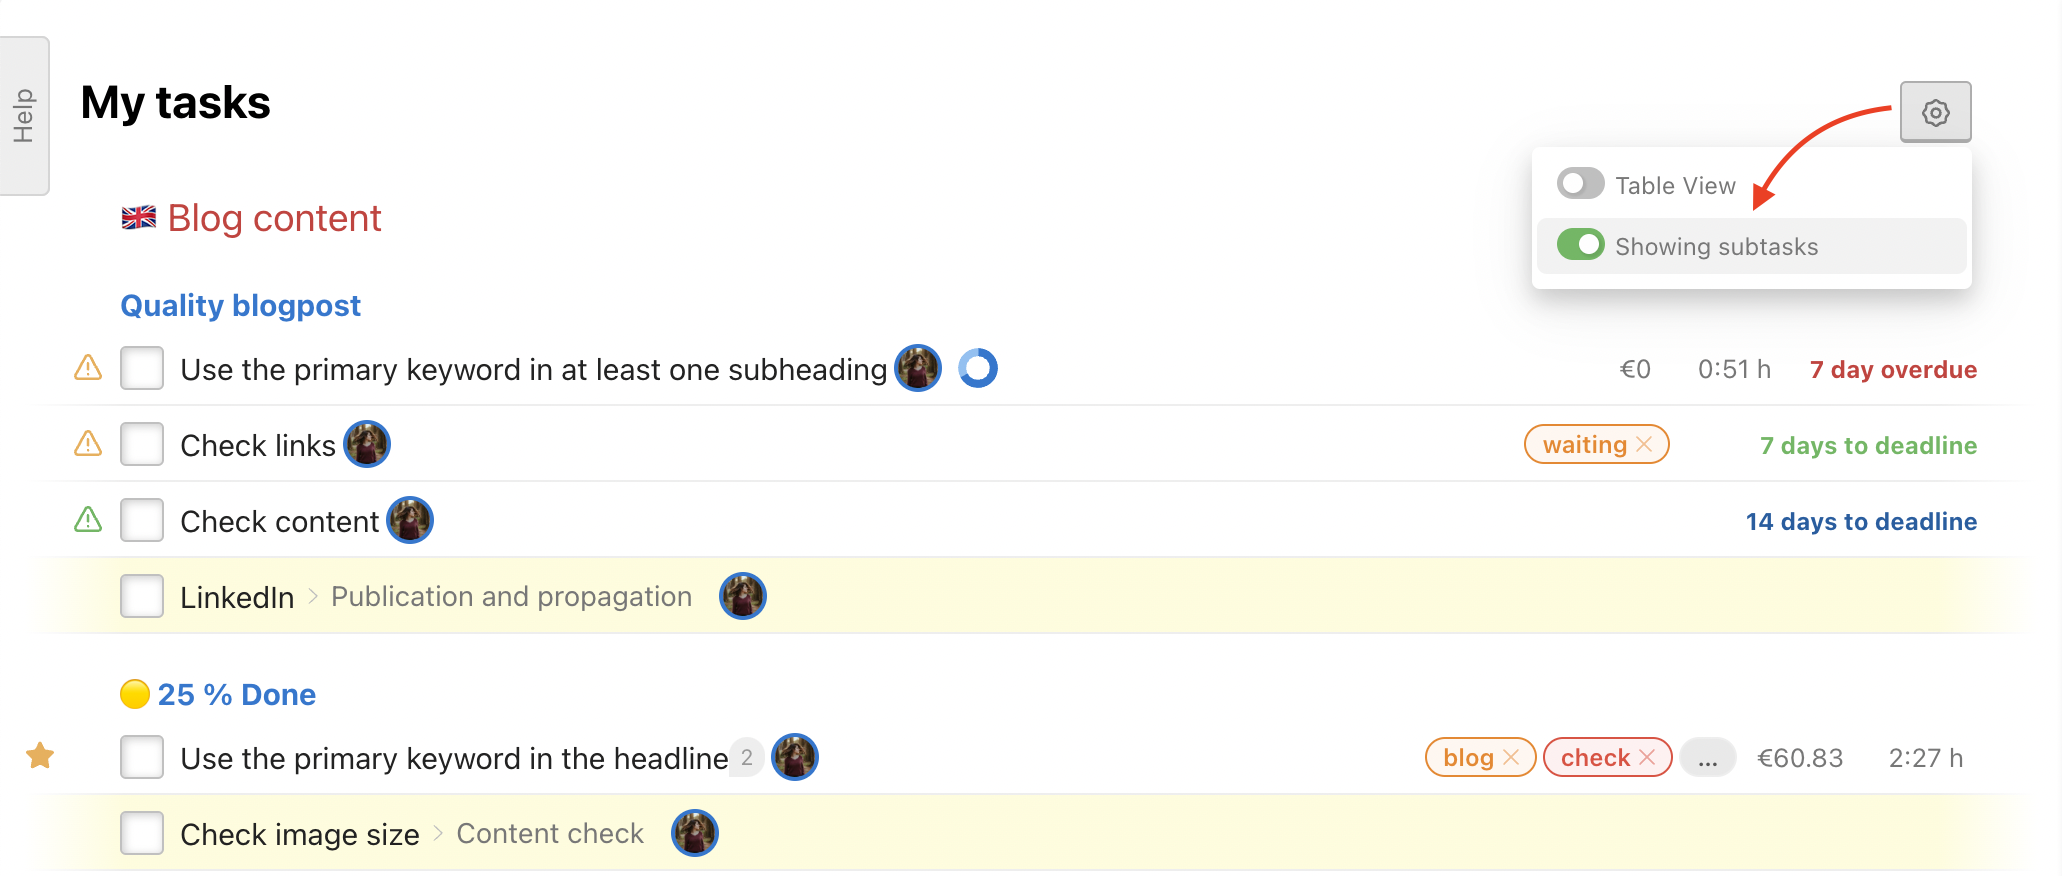 How to showing subtasks on Dashboard.